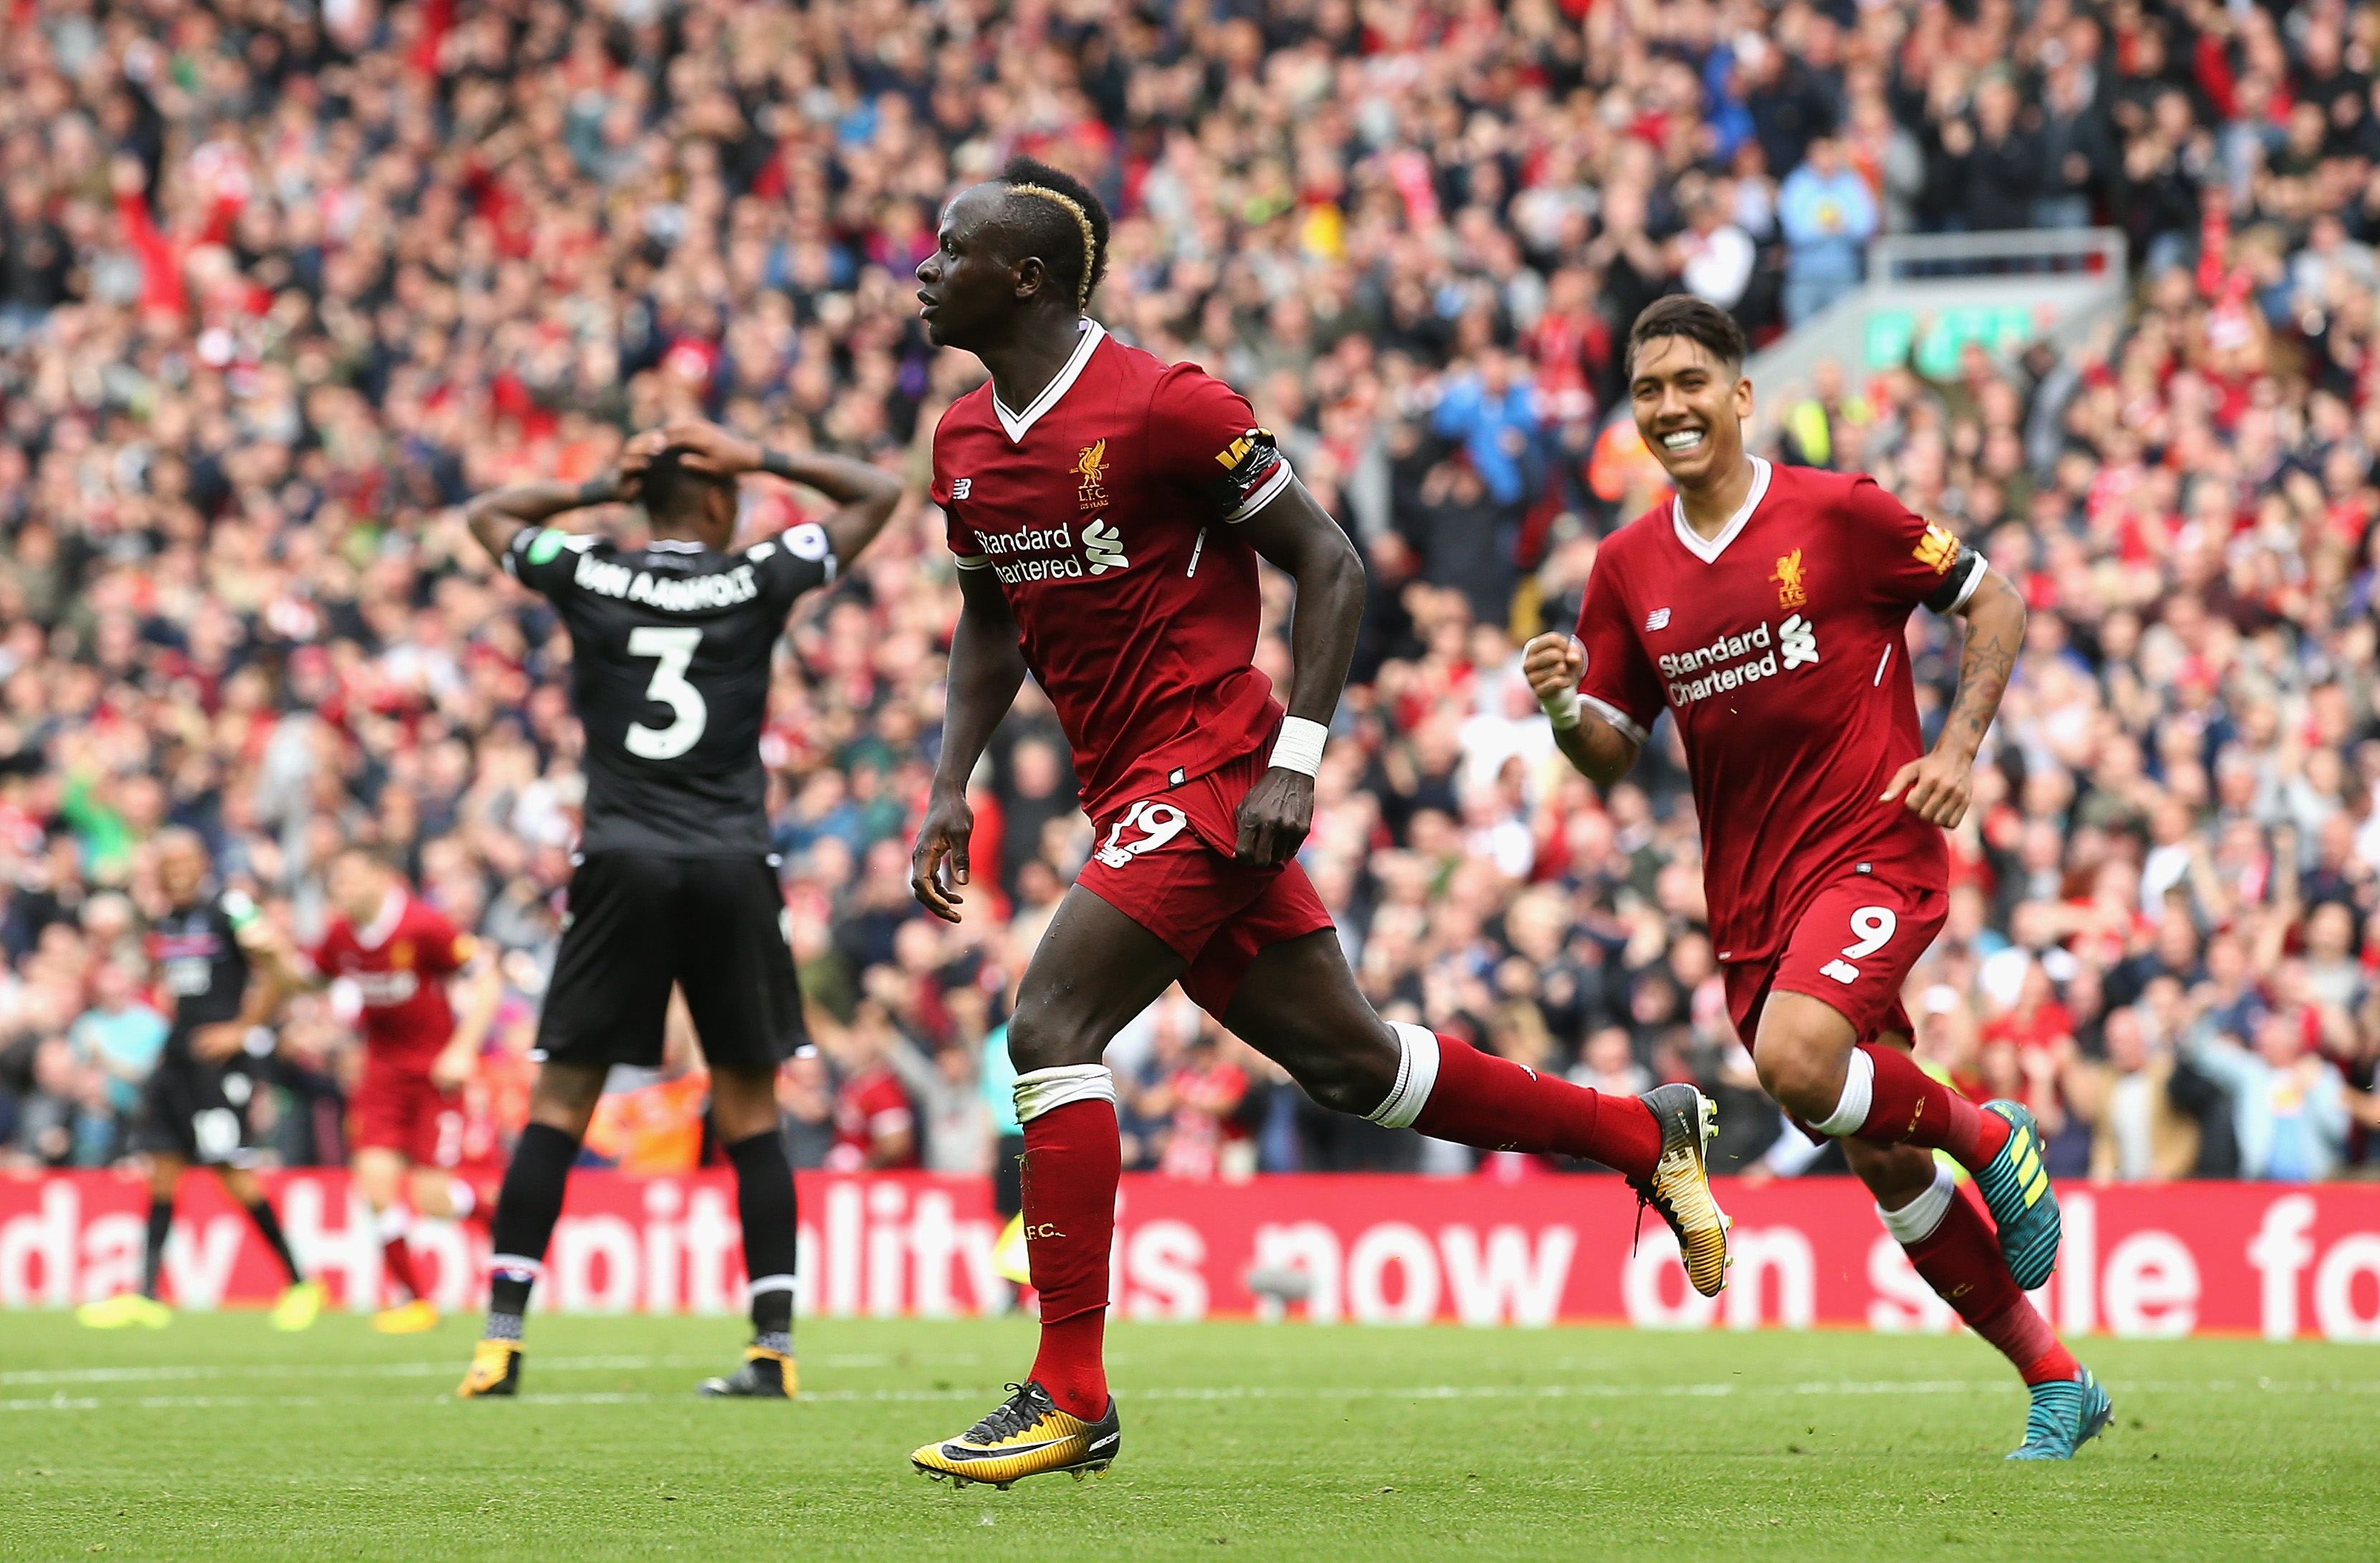 LIVERPOOL, ENGLAND - AUGUST 19: Sadio Mane of Liverpool celebrates scoring his sides first goal during the Premier League match between Liverpool and Crystal Palace at Anfield on August 19, 2017 in Liverpool, England.  (Photo by Jan Kruger/Getty Images)